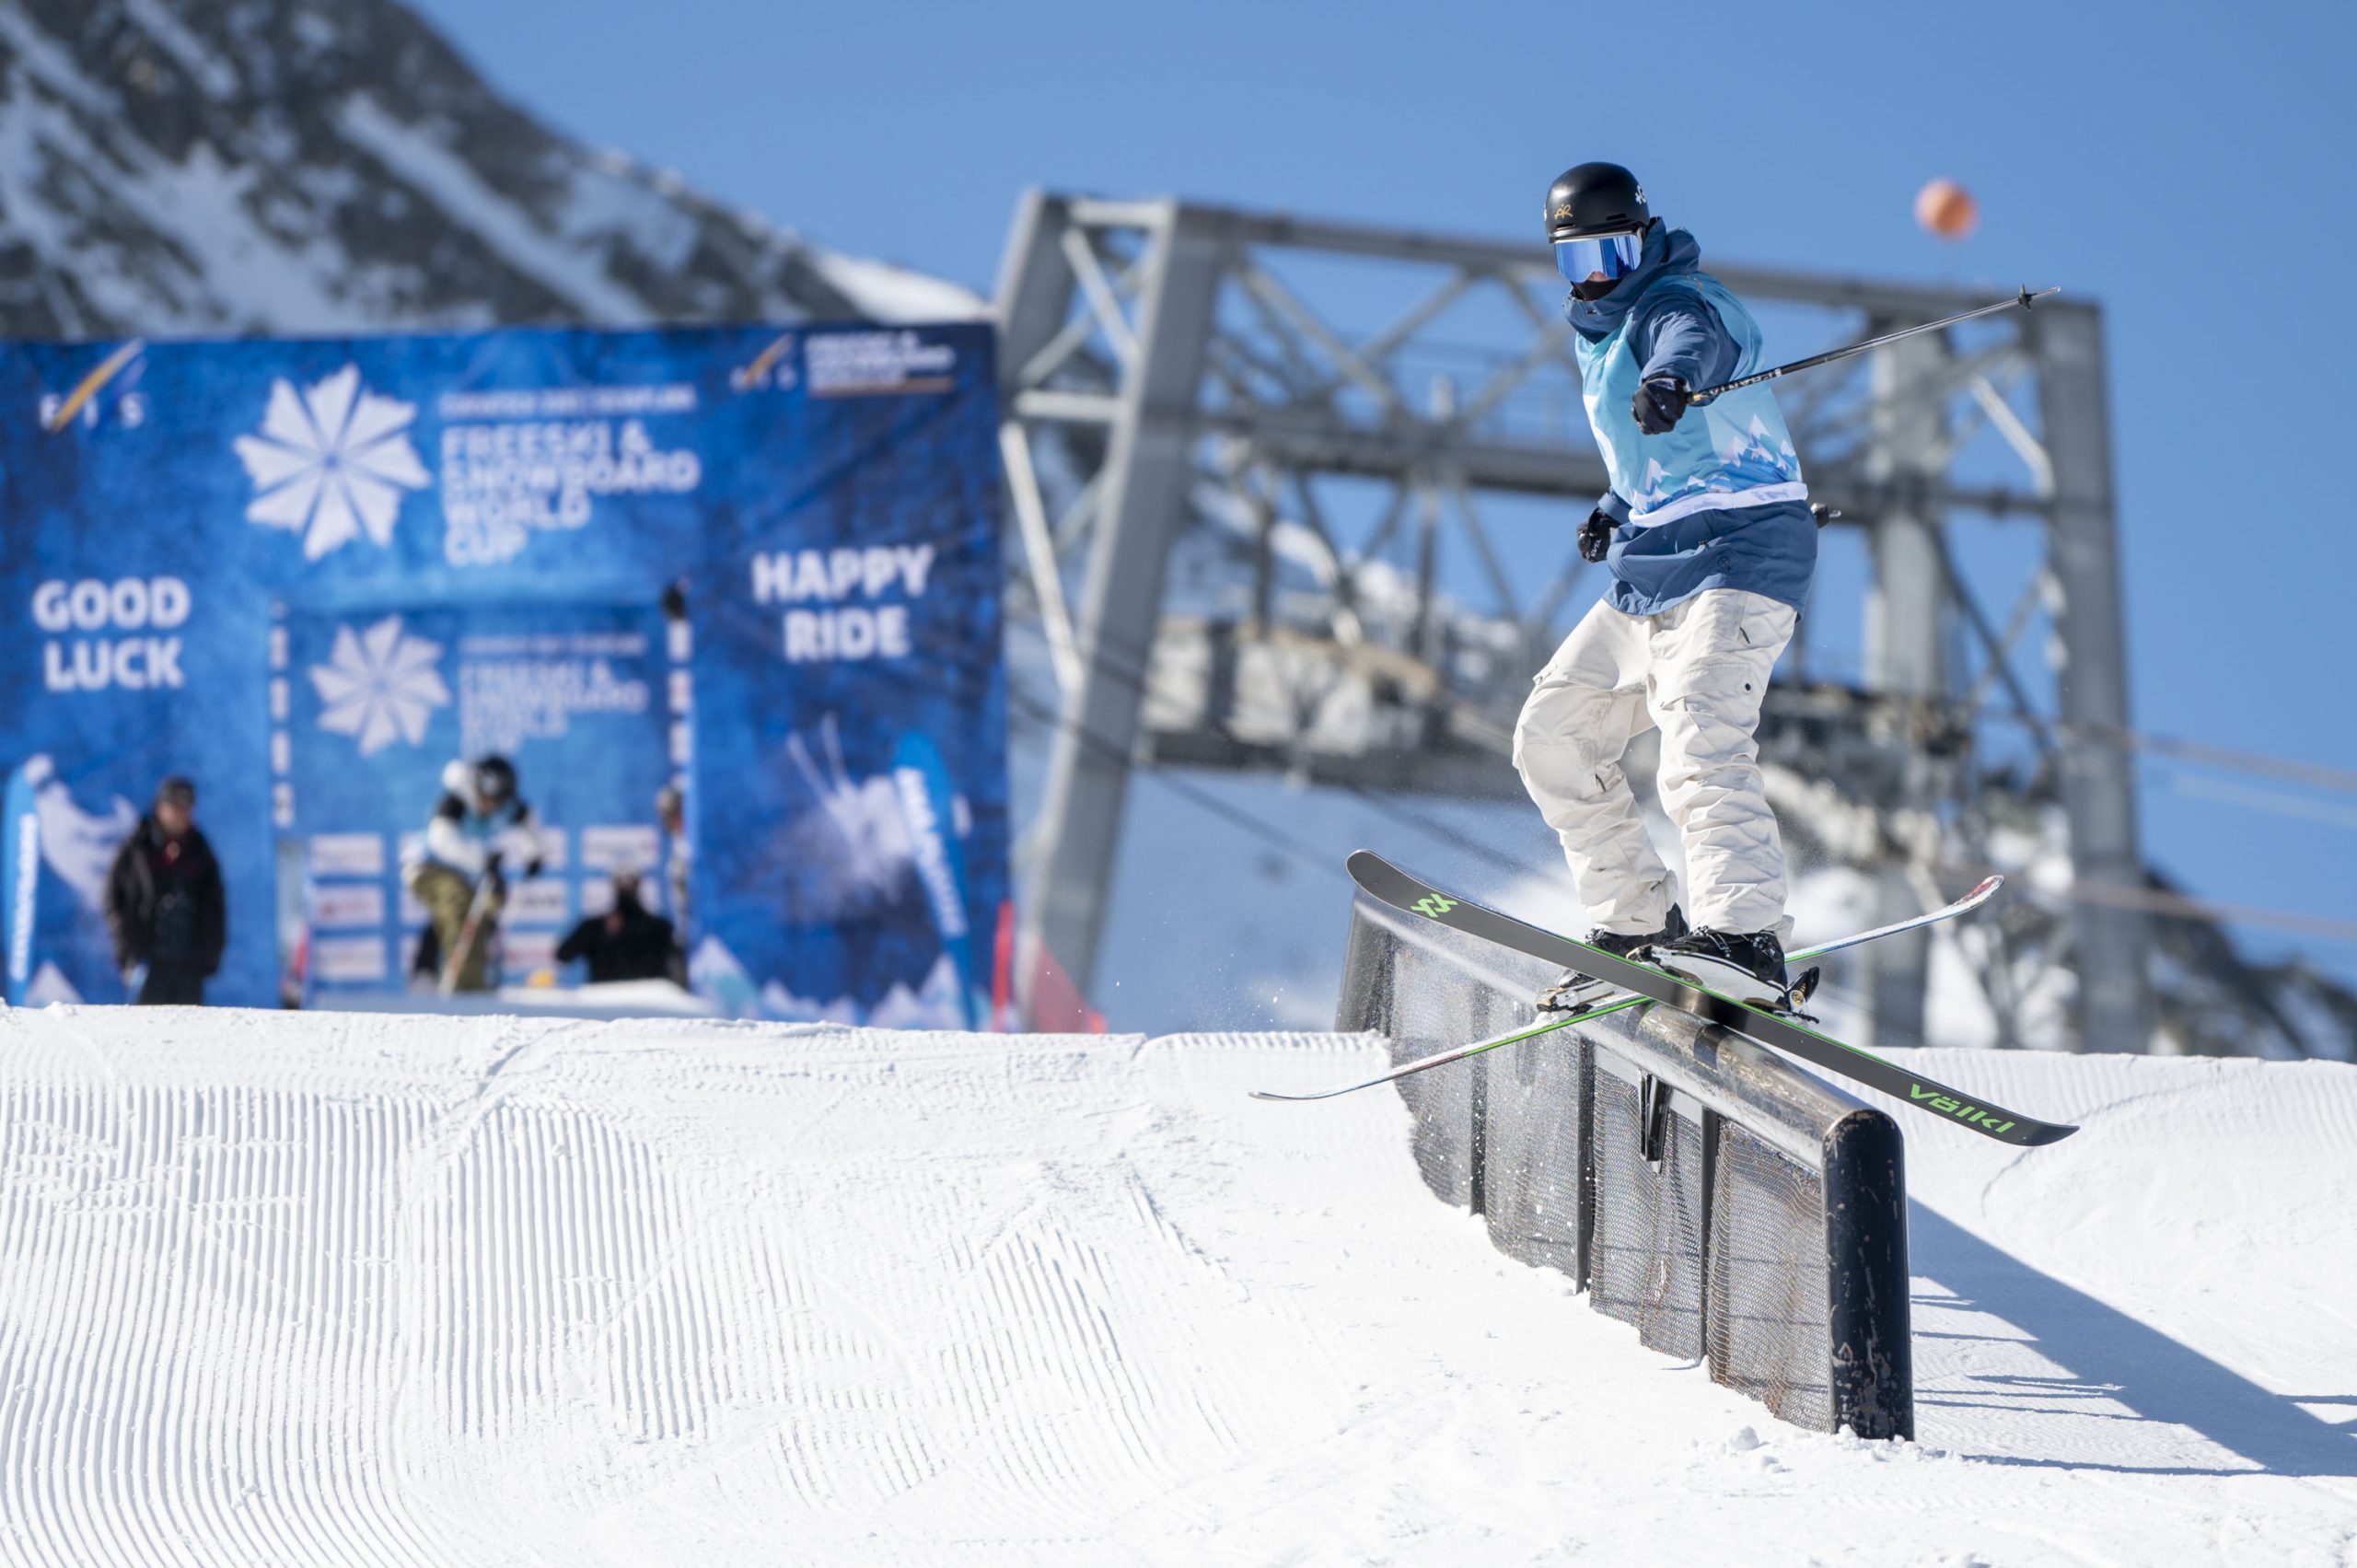 Andri Ragettli competes at the 2022 Freeski World Cup Corvatsch